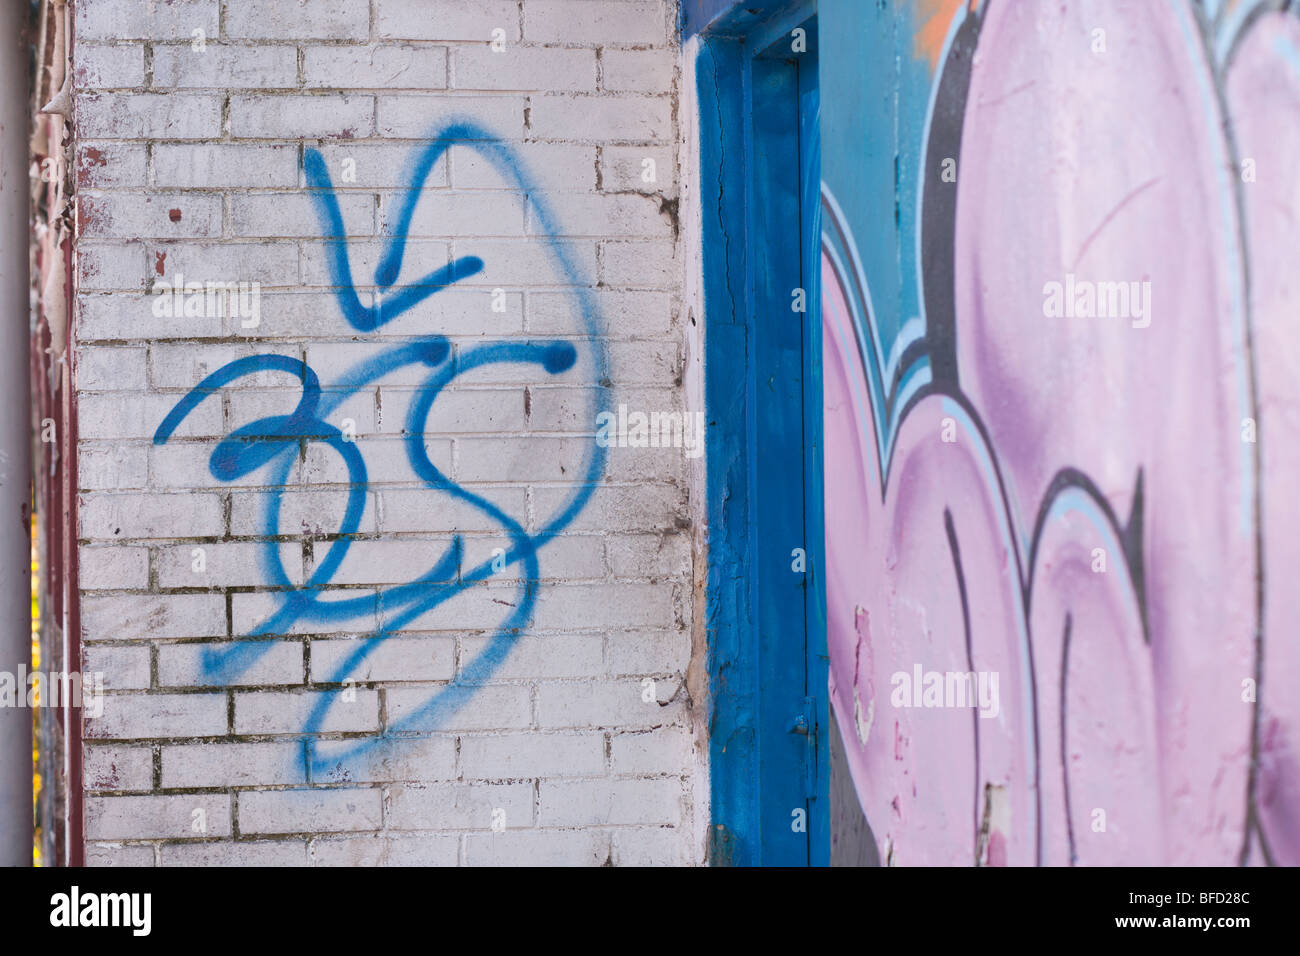 Graffiti tag spray painted on a brick wall. Vandalism by youths, hoodies. Inner city Sneinton Nottingham. Stock Photo